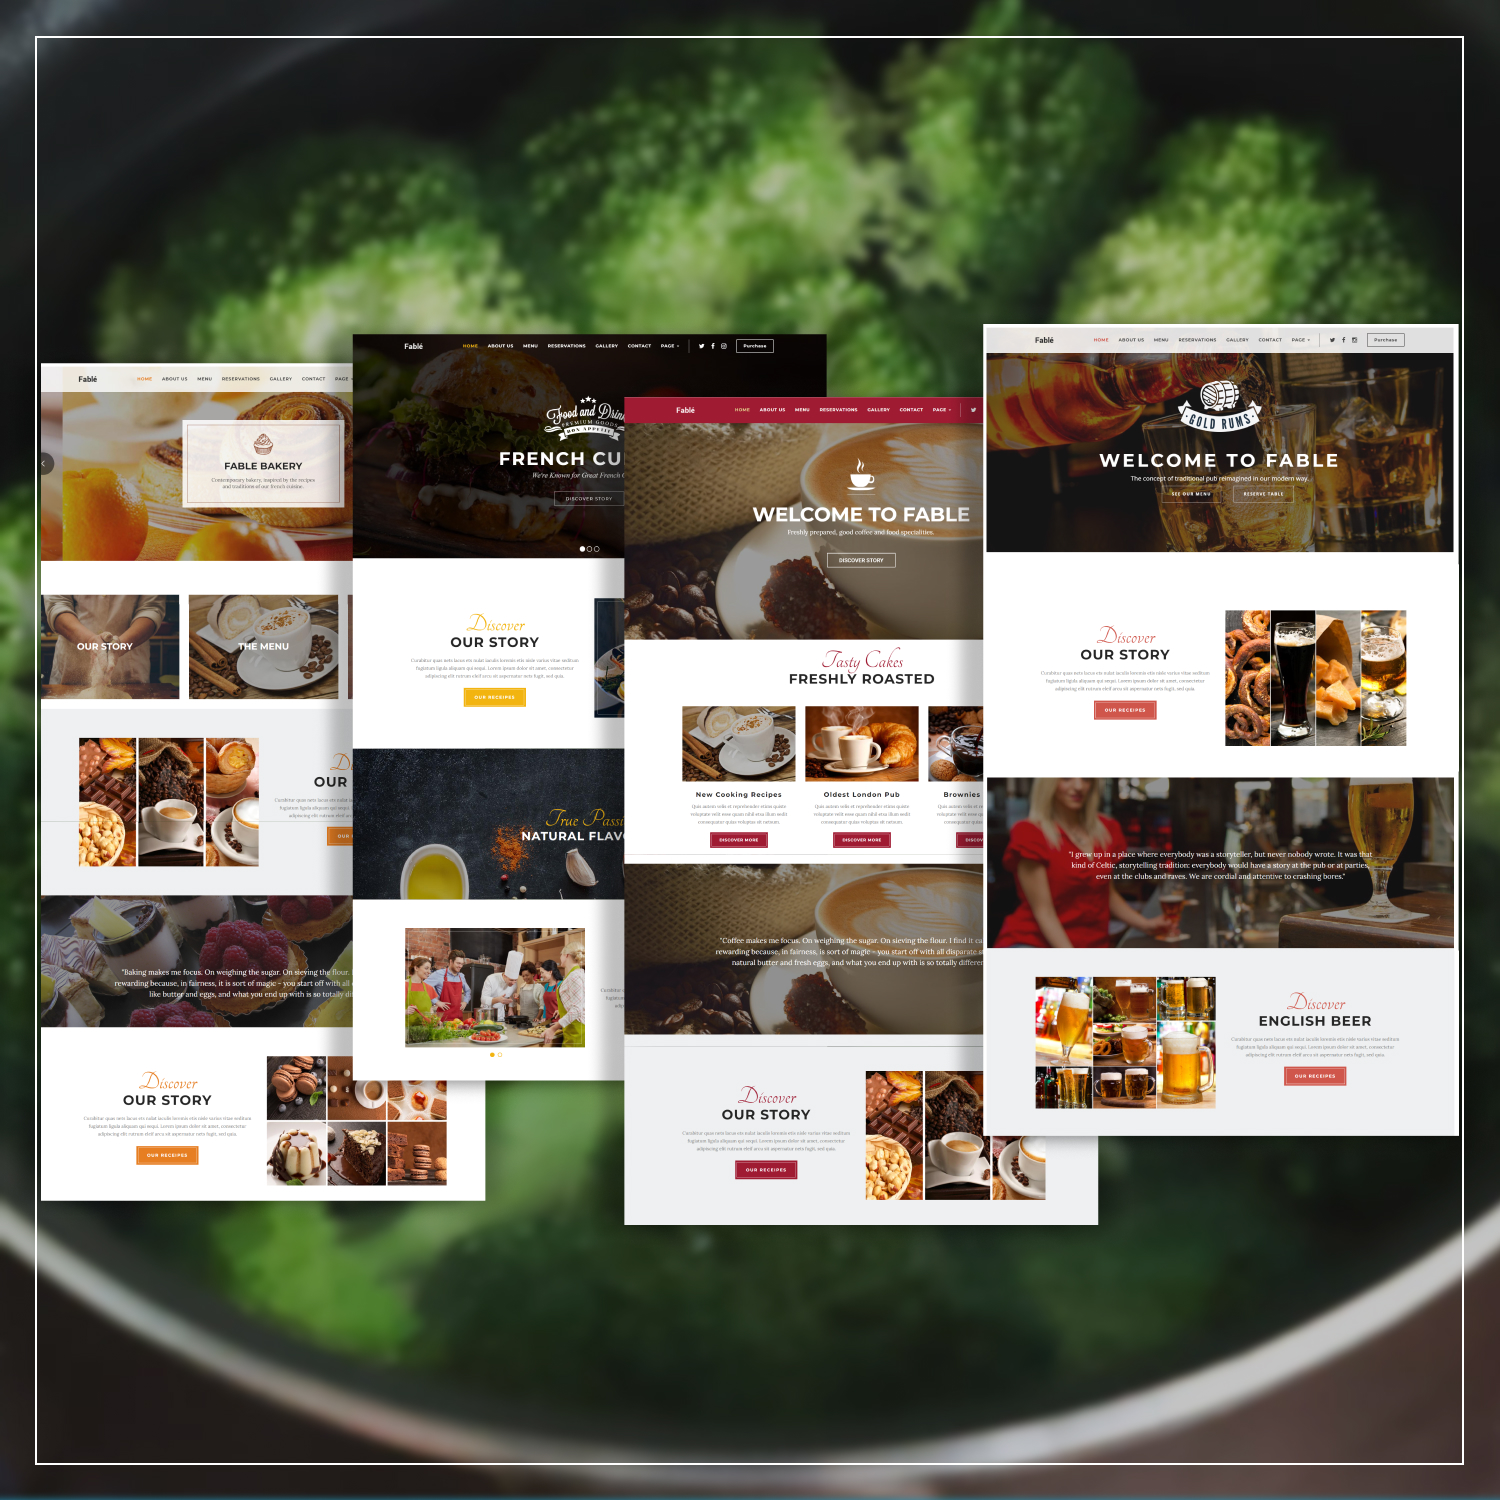 Preview fable restaurant bakery cafe pub wordpress theme.